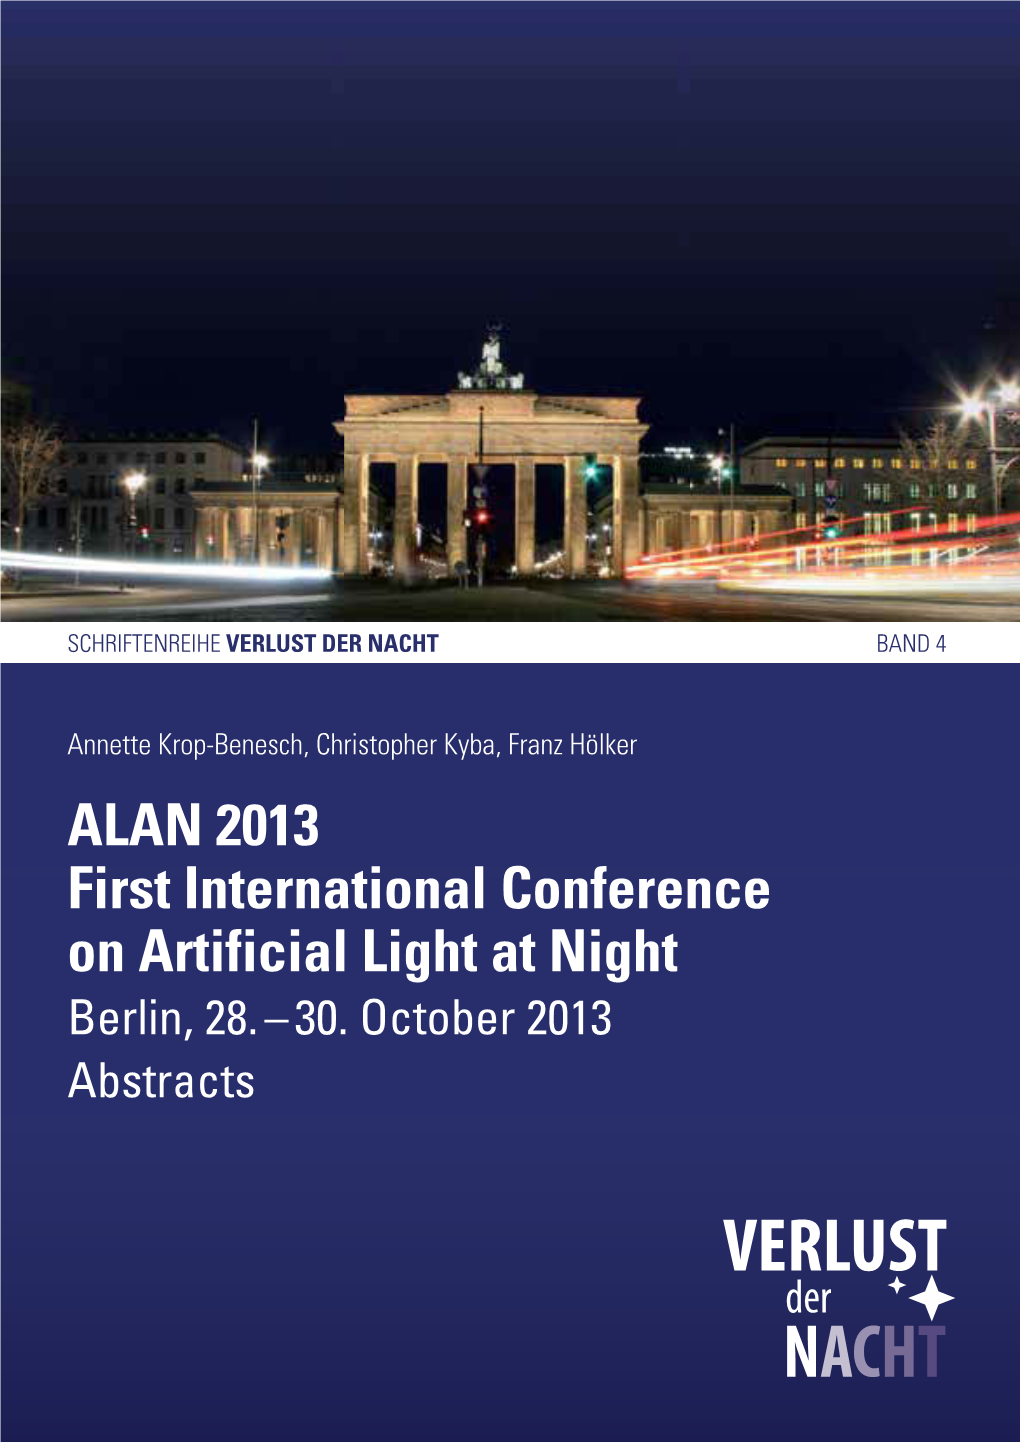 First International Conference on Artificial Light at Night